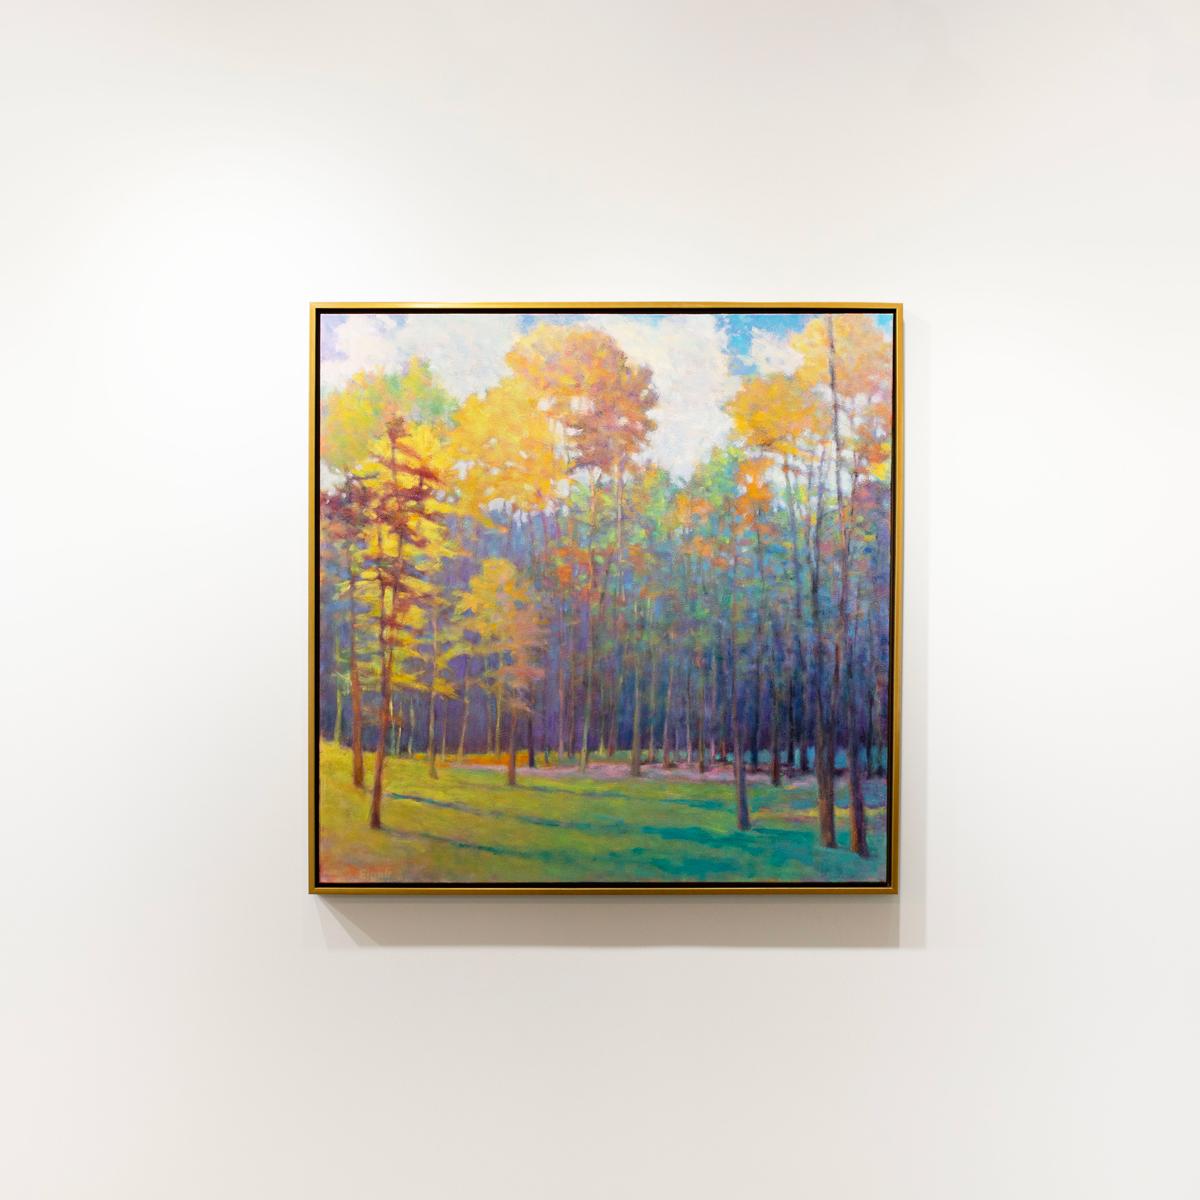 This framed abstracted landscape painting by Ken Elliott features forest landscape composition and a colorful palette with contrasting warm and cool tones. Large trees cast cool blue shadows over a grassy forest floor. The painting is made with oil